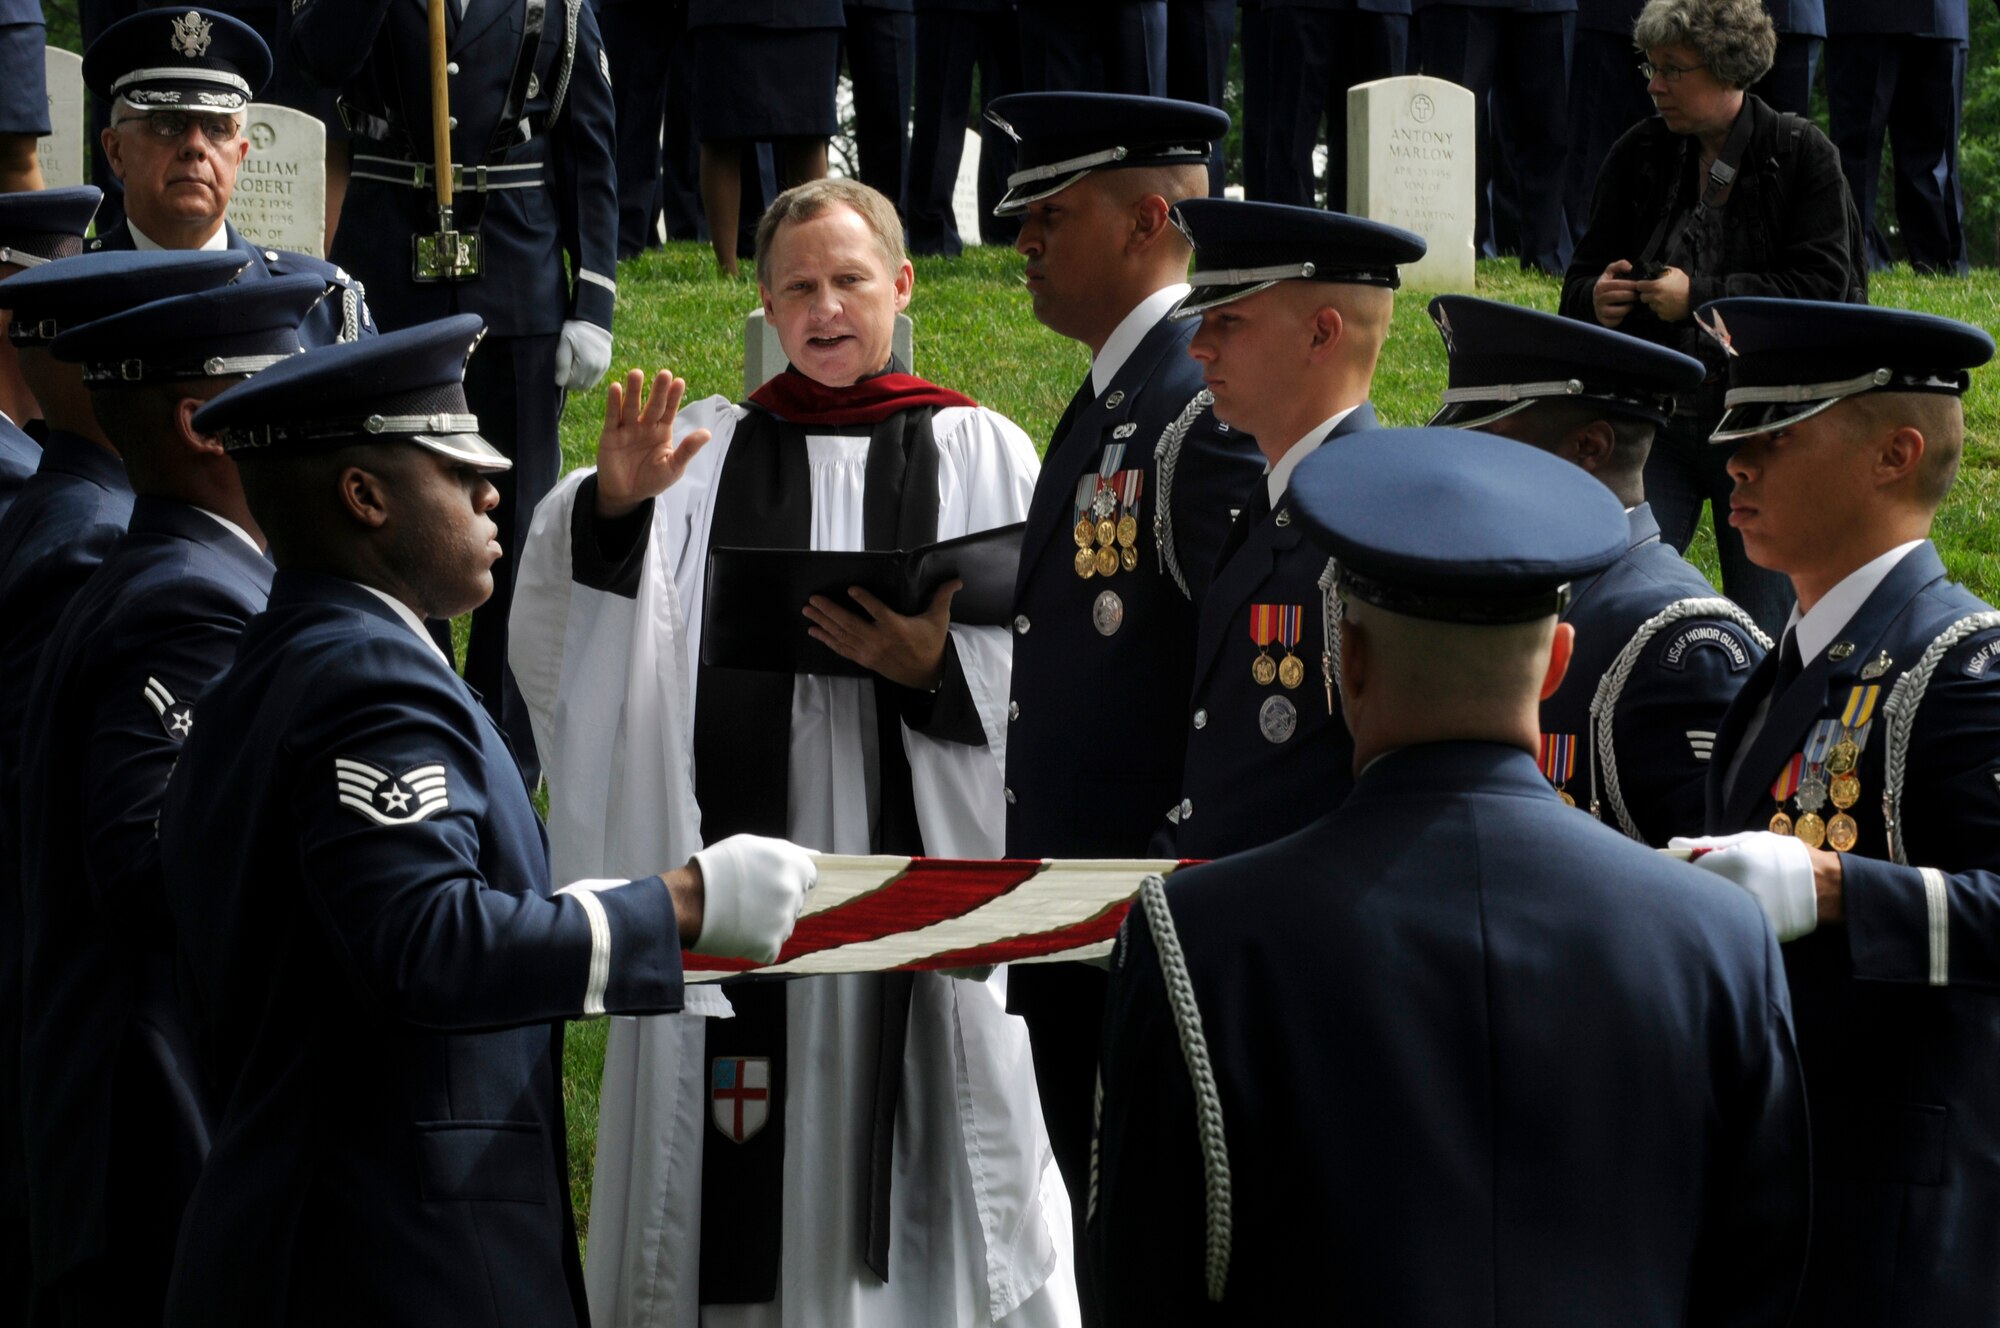 Members of a U.S. Air Force Honor Guard body bearer’s element fold the U.S. flag over the remains of former Chief Master Sgt. of the Air Force Paul W. Airey, during a funeral in his honor 28 May, at Arlington National Cemetery in Arlington Va. Former CMSAF Airey was adviser to Secretary of the Air Force Harold Brown and Chief of Staff of the Air Force Gen. John P. McConnell on matters concerning welfare, effective utilization and progress of the enlisted members of the Air Force. Former CMSAF Airey was the first chief master sergeant appointed to this ultimate noncommissioned officer position and was selected from among 21 major air command nominees to become the first chief master sergeant of the Air Force. (U.S. Air Force photo by Staff Sgt. Dan DeCook)